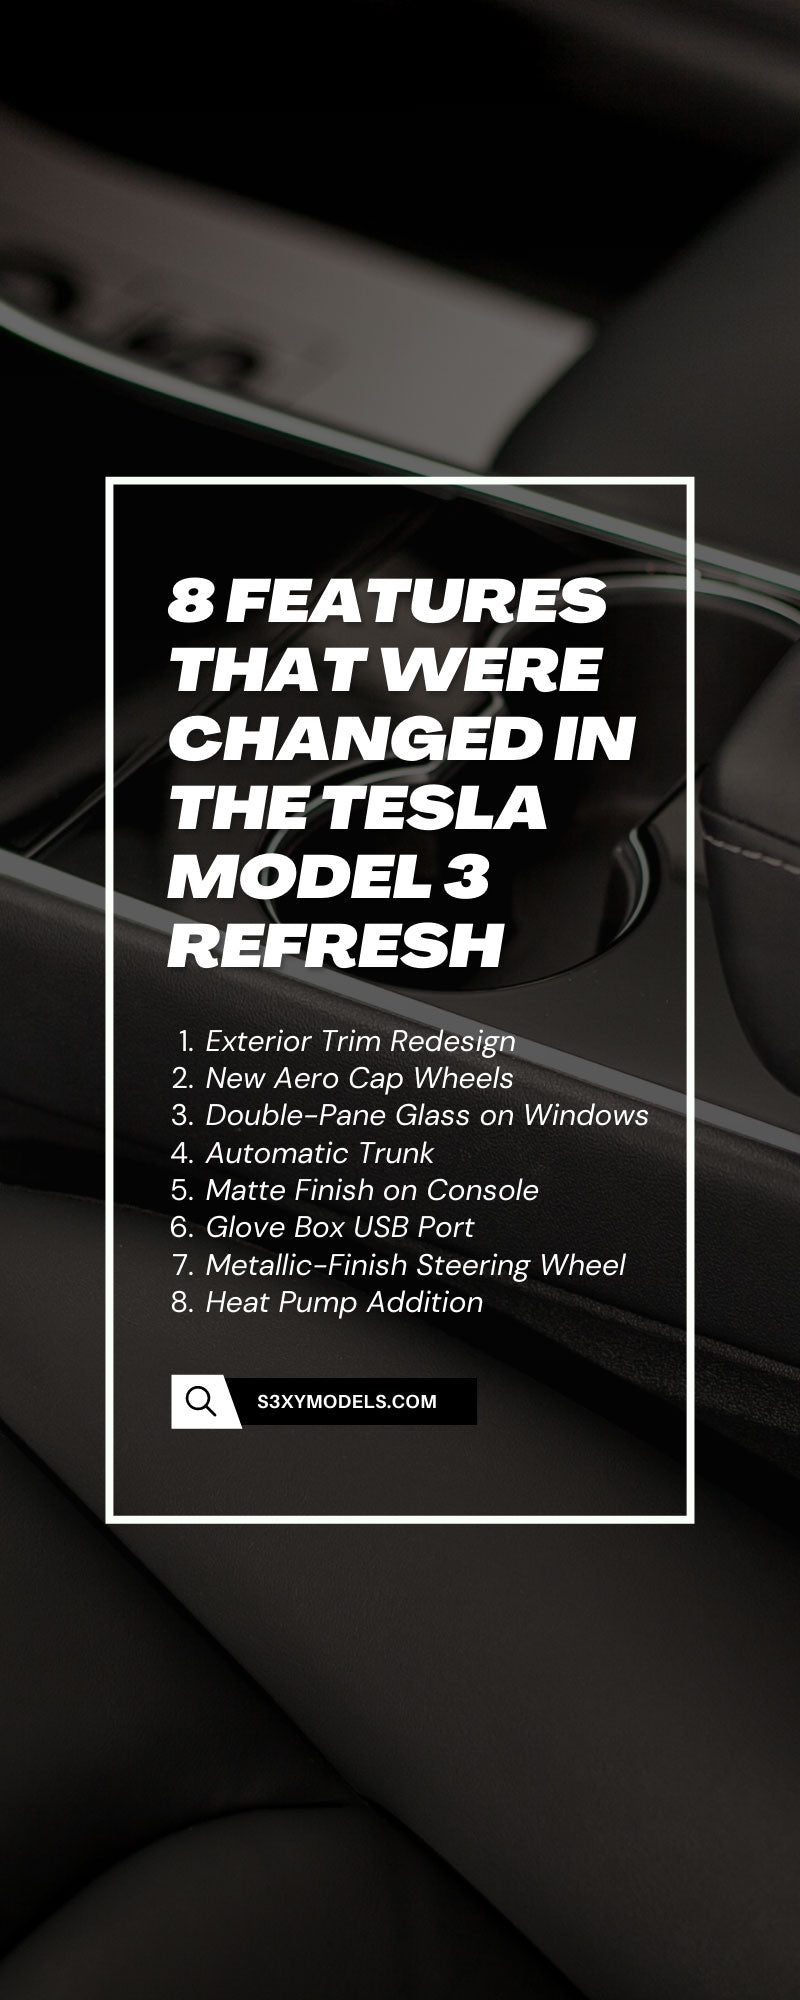 8 Features That Were Changed in the Tesla Model 3 Refresh